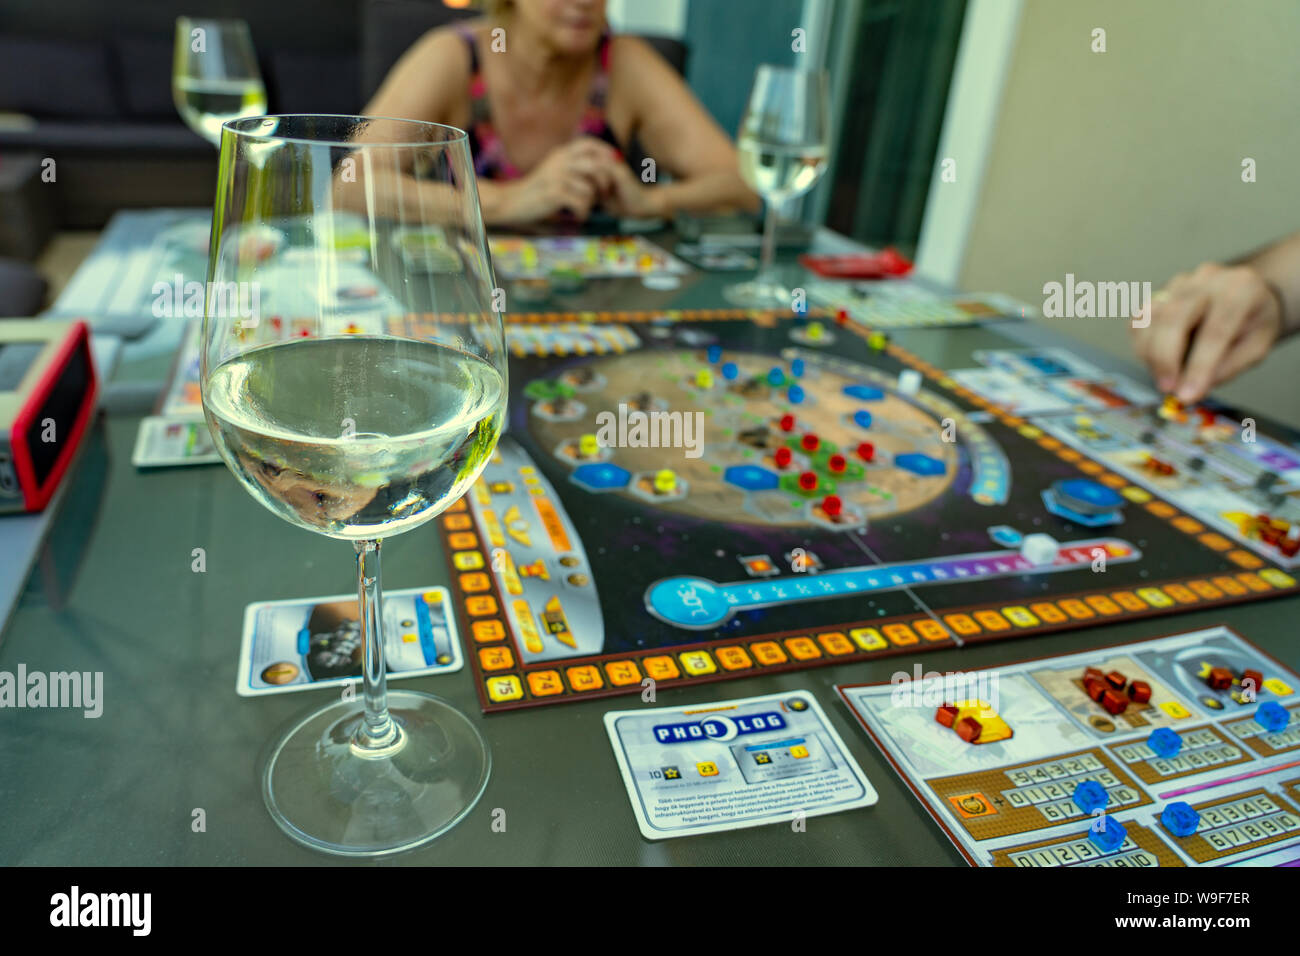 Balogunyom / Hungary - 08.12.2019: Glass of White wine with home entertainment Players playing board game Terraforming Mars strategy game Stock Photo